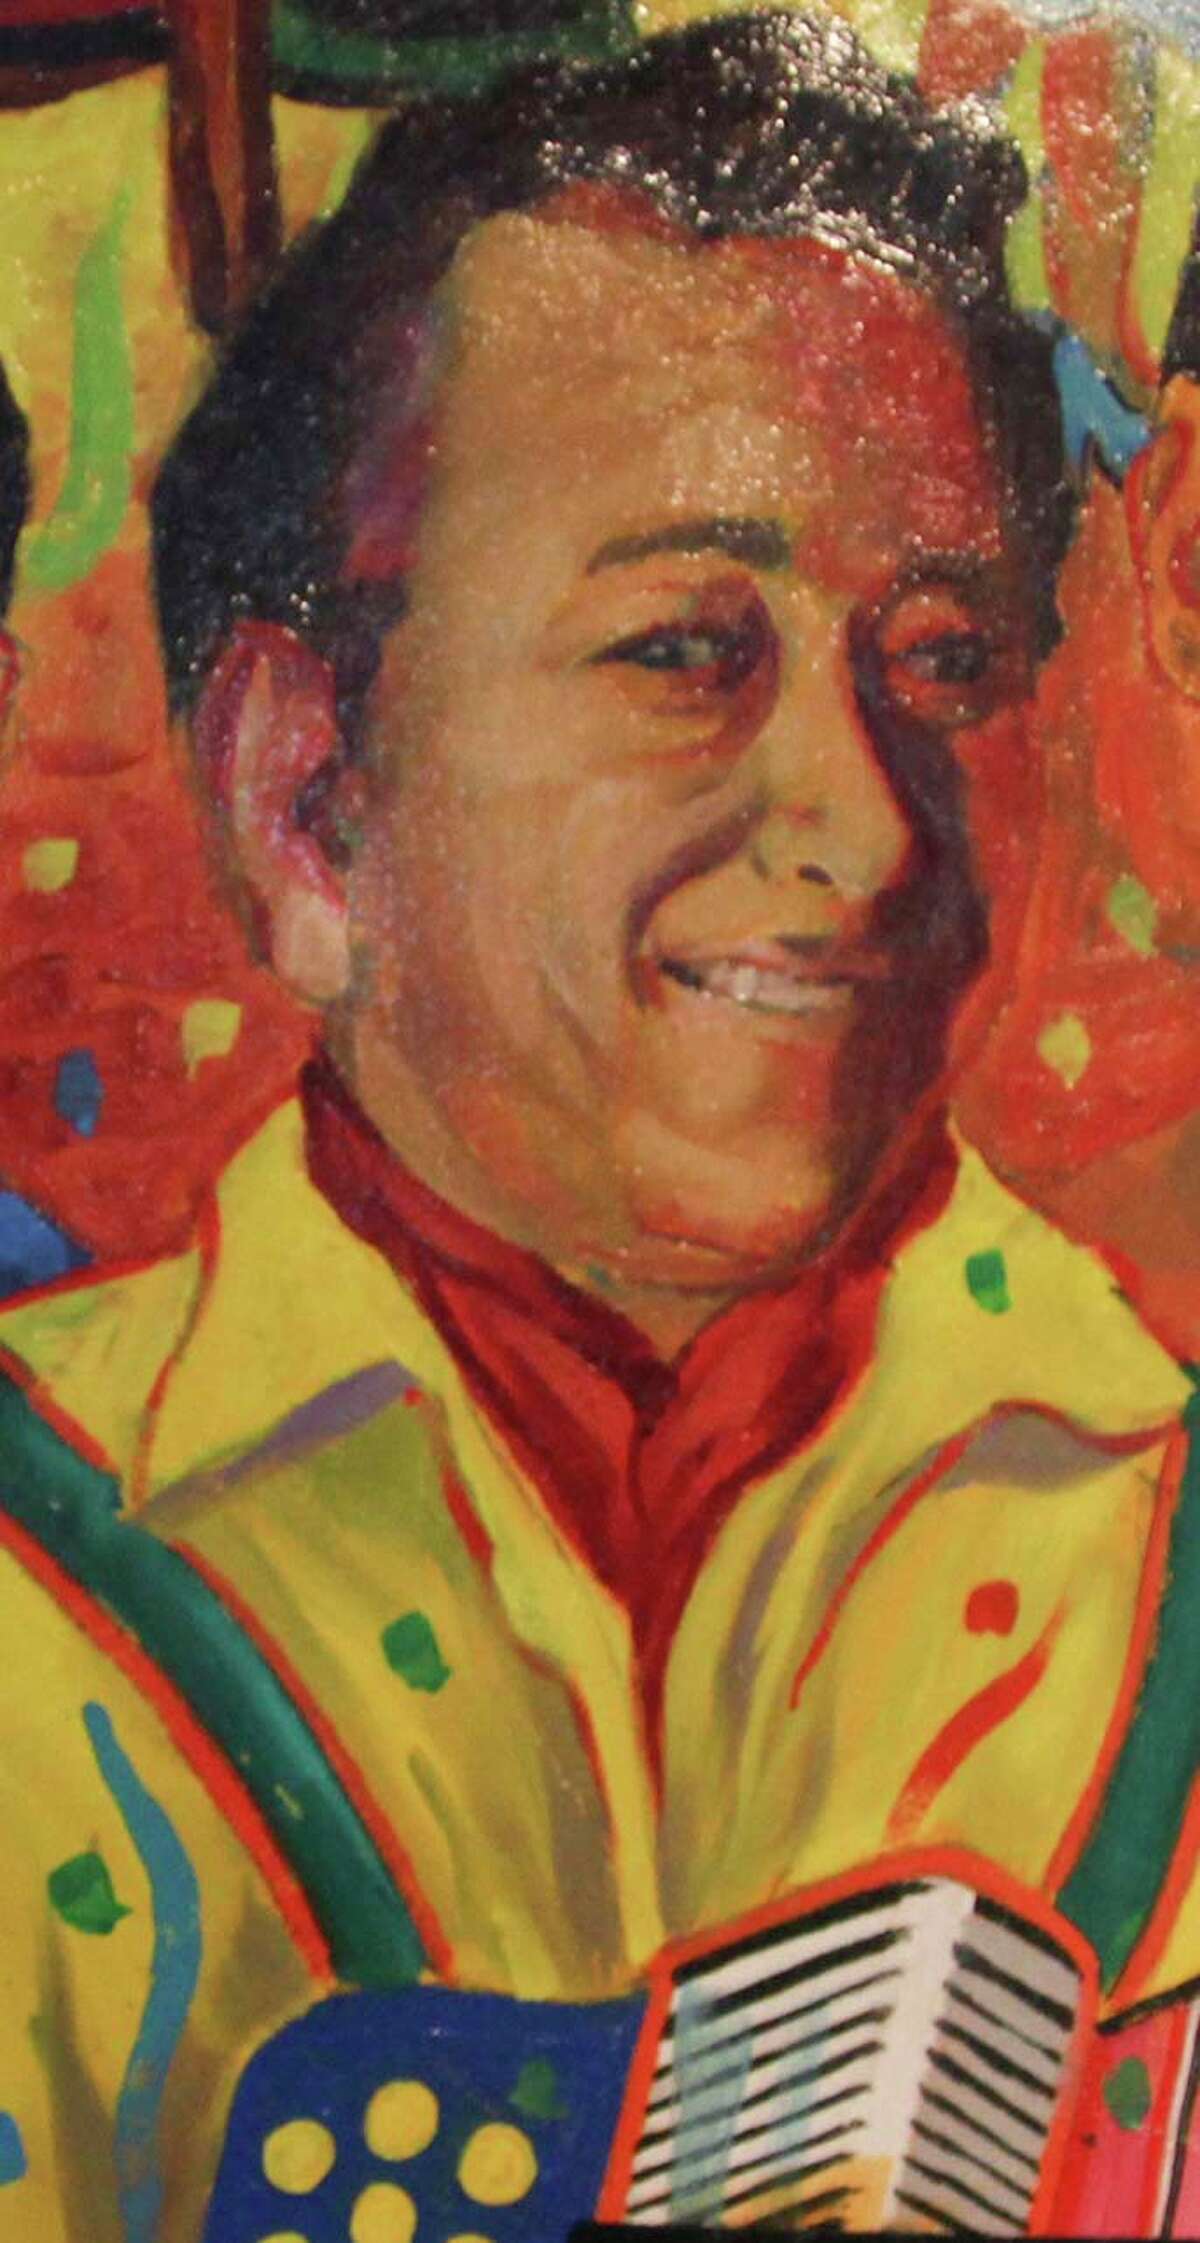 Flaco Jimenez The legendary San Antonio accordionist, who recently was awarded a lifetime achievement Grammy Award, has been influential in the music world for many years. Just last year, he was inducted into the Austin City Limits Hall of Fame.